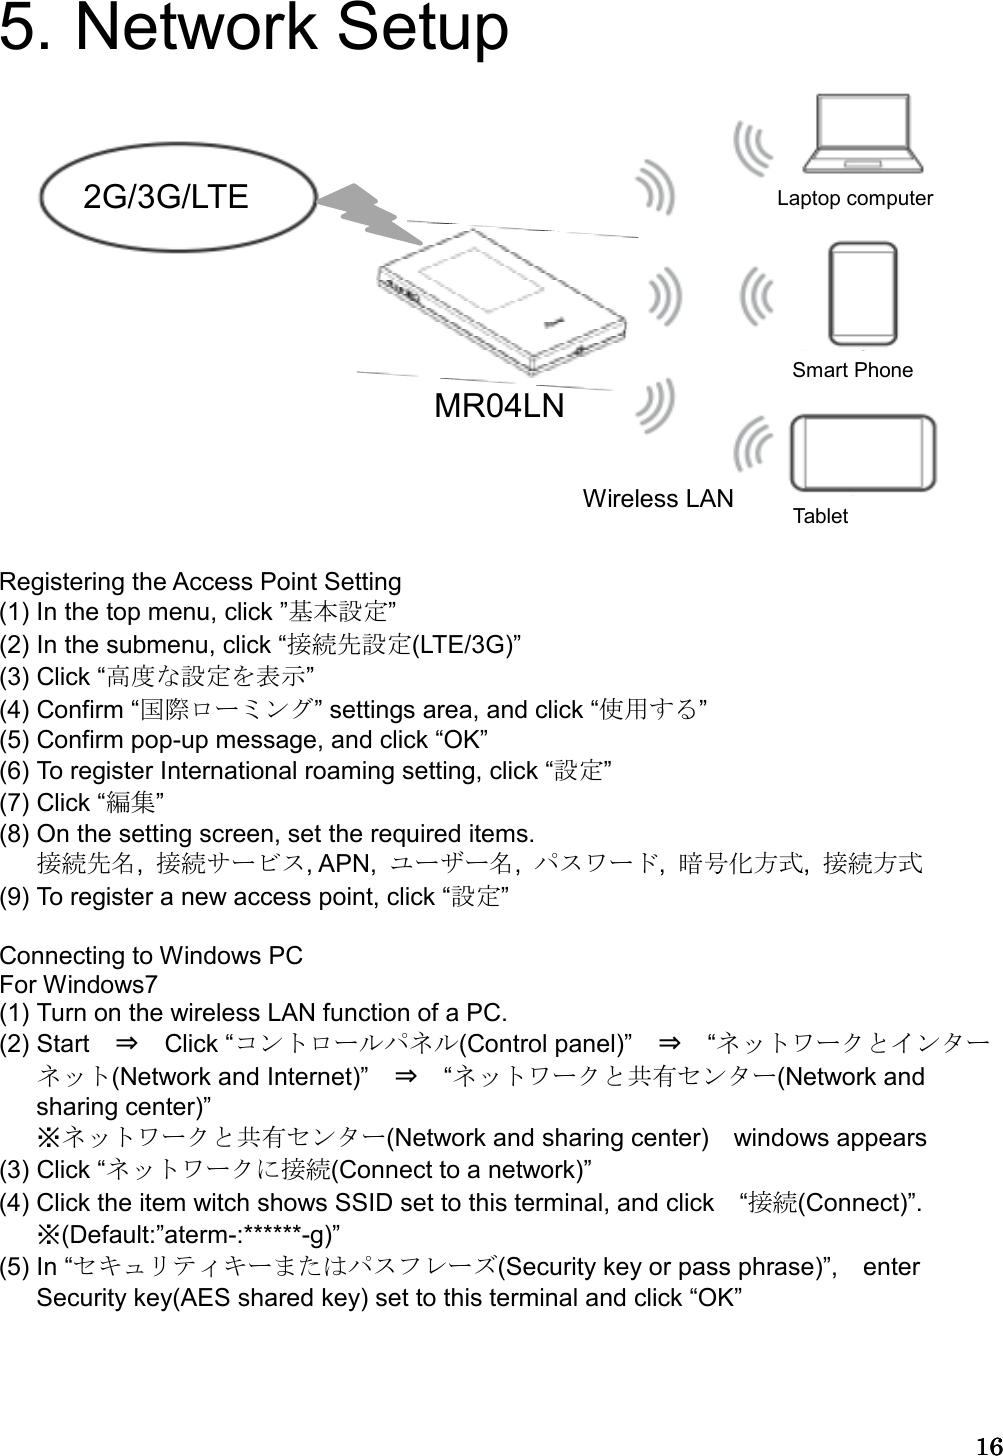 16161616   5. Network Setup     Registering the Access Point Setting (1) In the top menu, click ”基本設定” (2) In the submenu, click “接続先設定(LTE/3G)” (3) Click “高度な設定を表示” (4) Confirm “国際ローミング” settings area, and click “使用する”   (5) Confirm pop-up message, and click “OK” (6) To register International roaming setting, click “設定” (7) Click “編集”   (8) On the setting screen, set the required items. 接続先名,  接続サービス, APN,  ユーザー名,  パスワード,  暗号化方式,  接続方式 (9) To register a new access point, click “設定”  Connecting to Windows PC For Windows7 (1) Turn on the wireless LAN function of a PC. (2) Start ⇒ Click “コントロールパネル(Control panel)” ⇒ “ネットワークとインターネット(Network and Internet)” ⇒ “ネットワークと共有センター(Network and sharing center)” ※ネットワークと共有センター(Network and sharing center) windows appears (3) Click “ネットワークに接続(Connect to a network)”  (4) Click the item witch shows SSID set to this terminal, and click    “接続(Connect)”. ※(Default:”aterm-:******-g)” (5) In “セキュリティキーまたはパスフレーズ(Security key or pass phrase)”, enter Security key(AES shared key) set to this terminal and click “OK”      Wireless LAN ２G 2G/3G/LTE MR04LN Laptop computer Smart Phone Tablet  